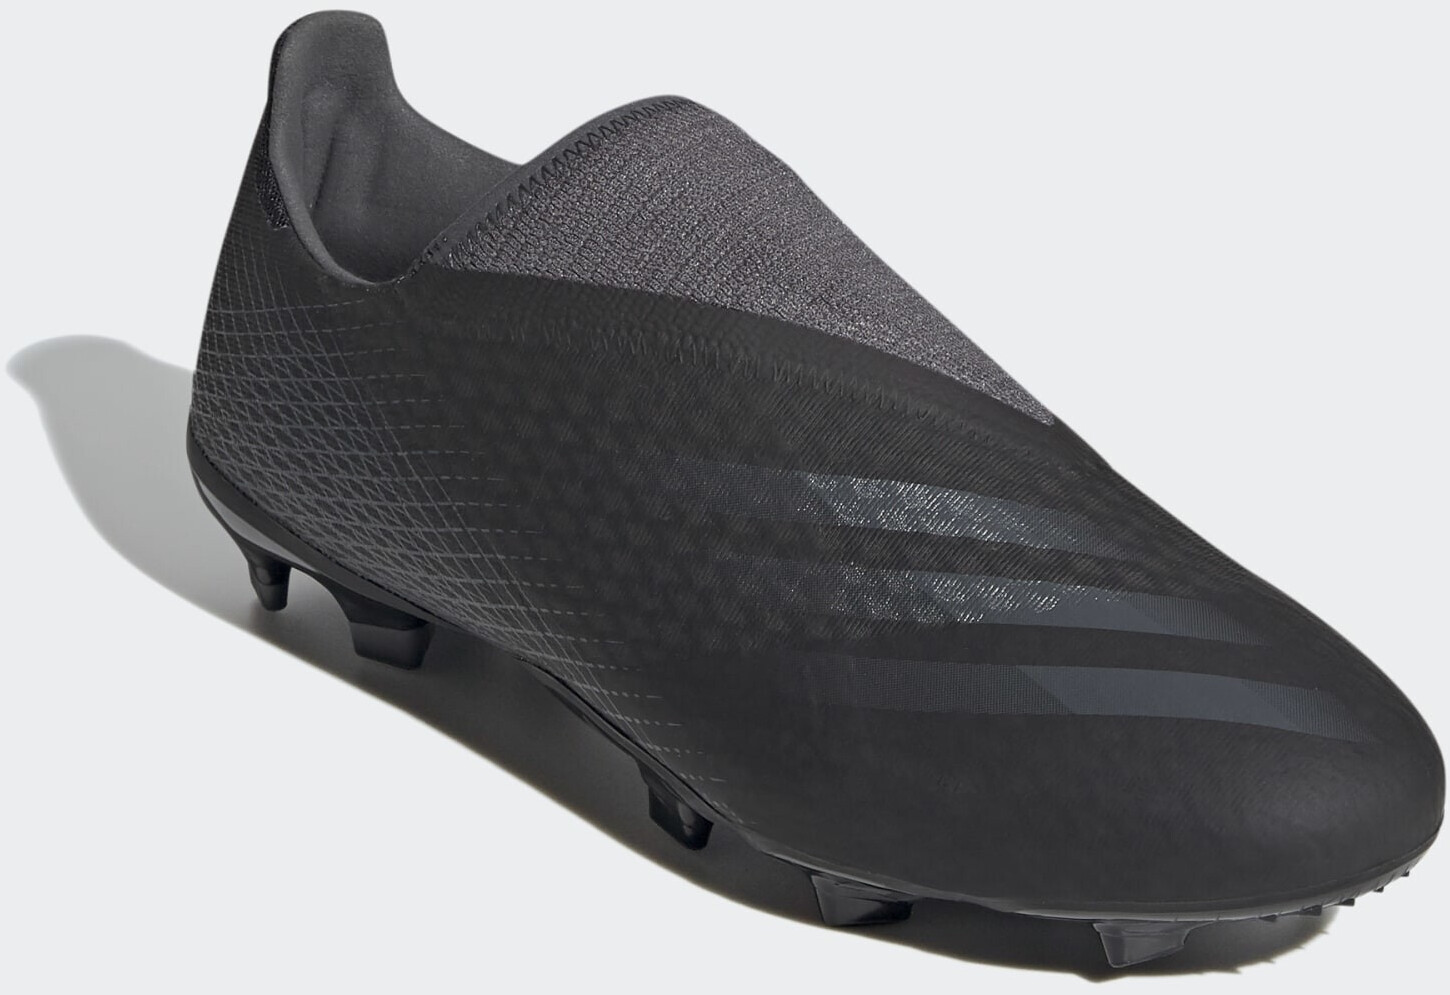 Buy Adidas X Ghosted.3 Laceless FG Core Black/Grey Six/Core Black from ...